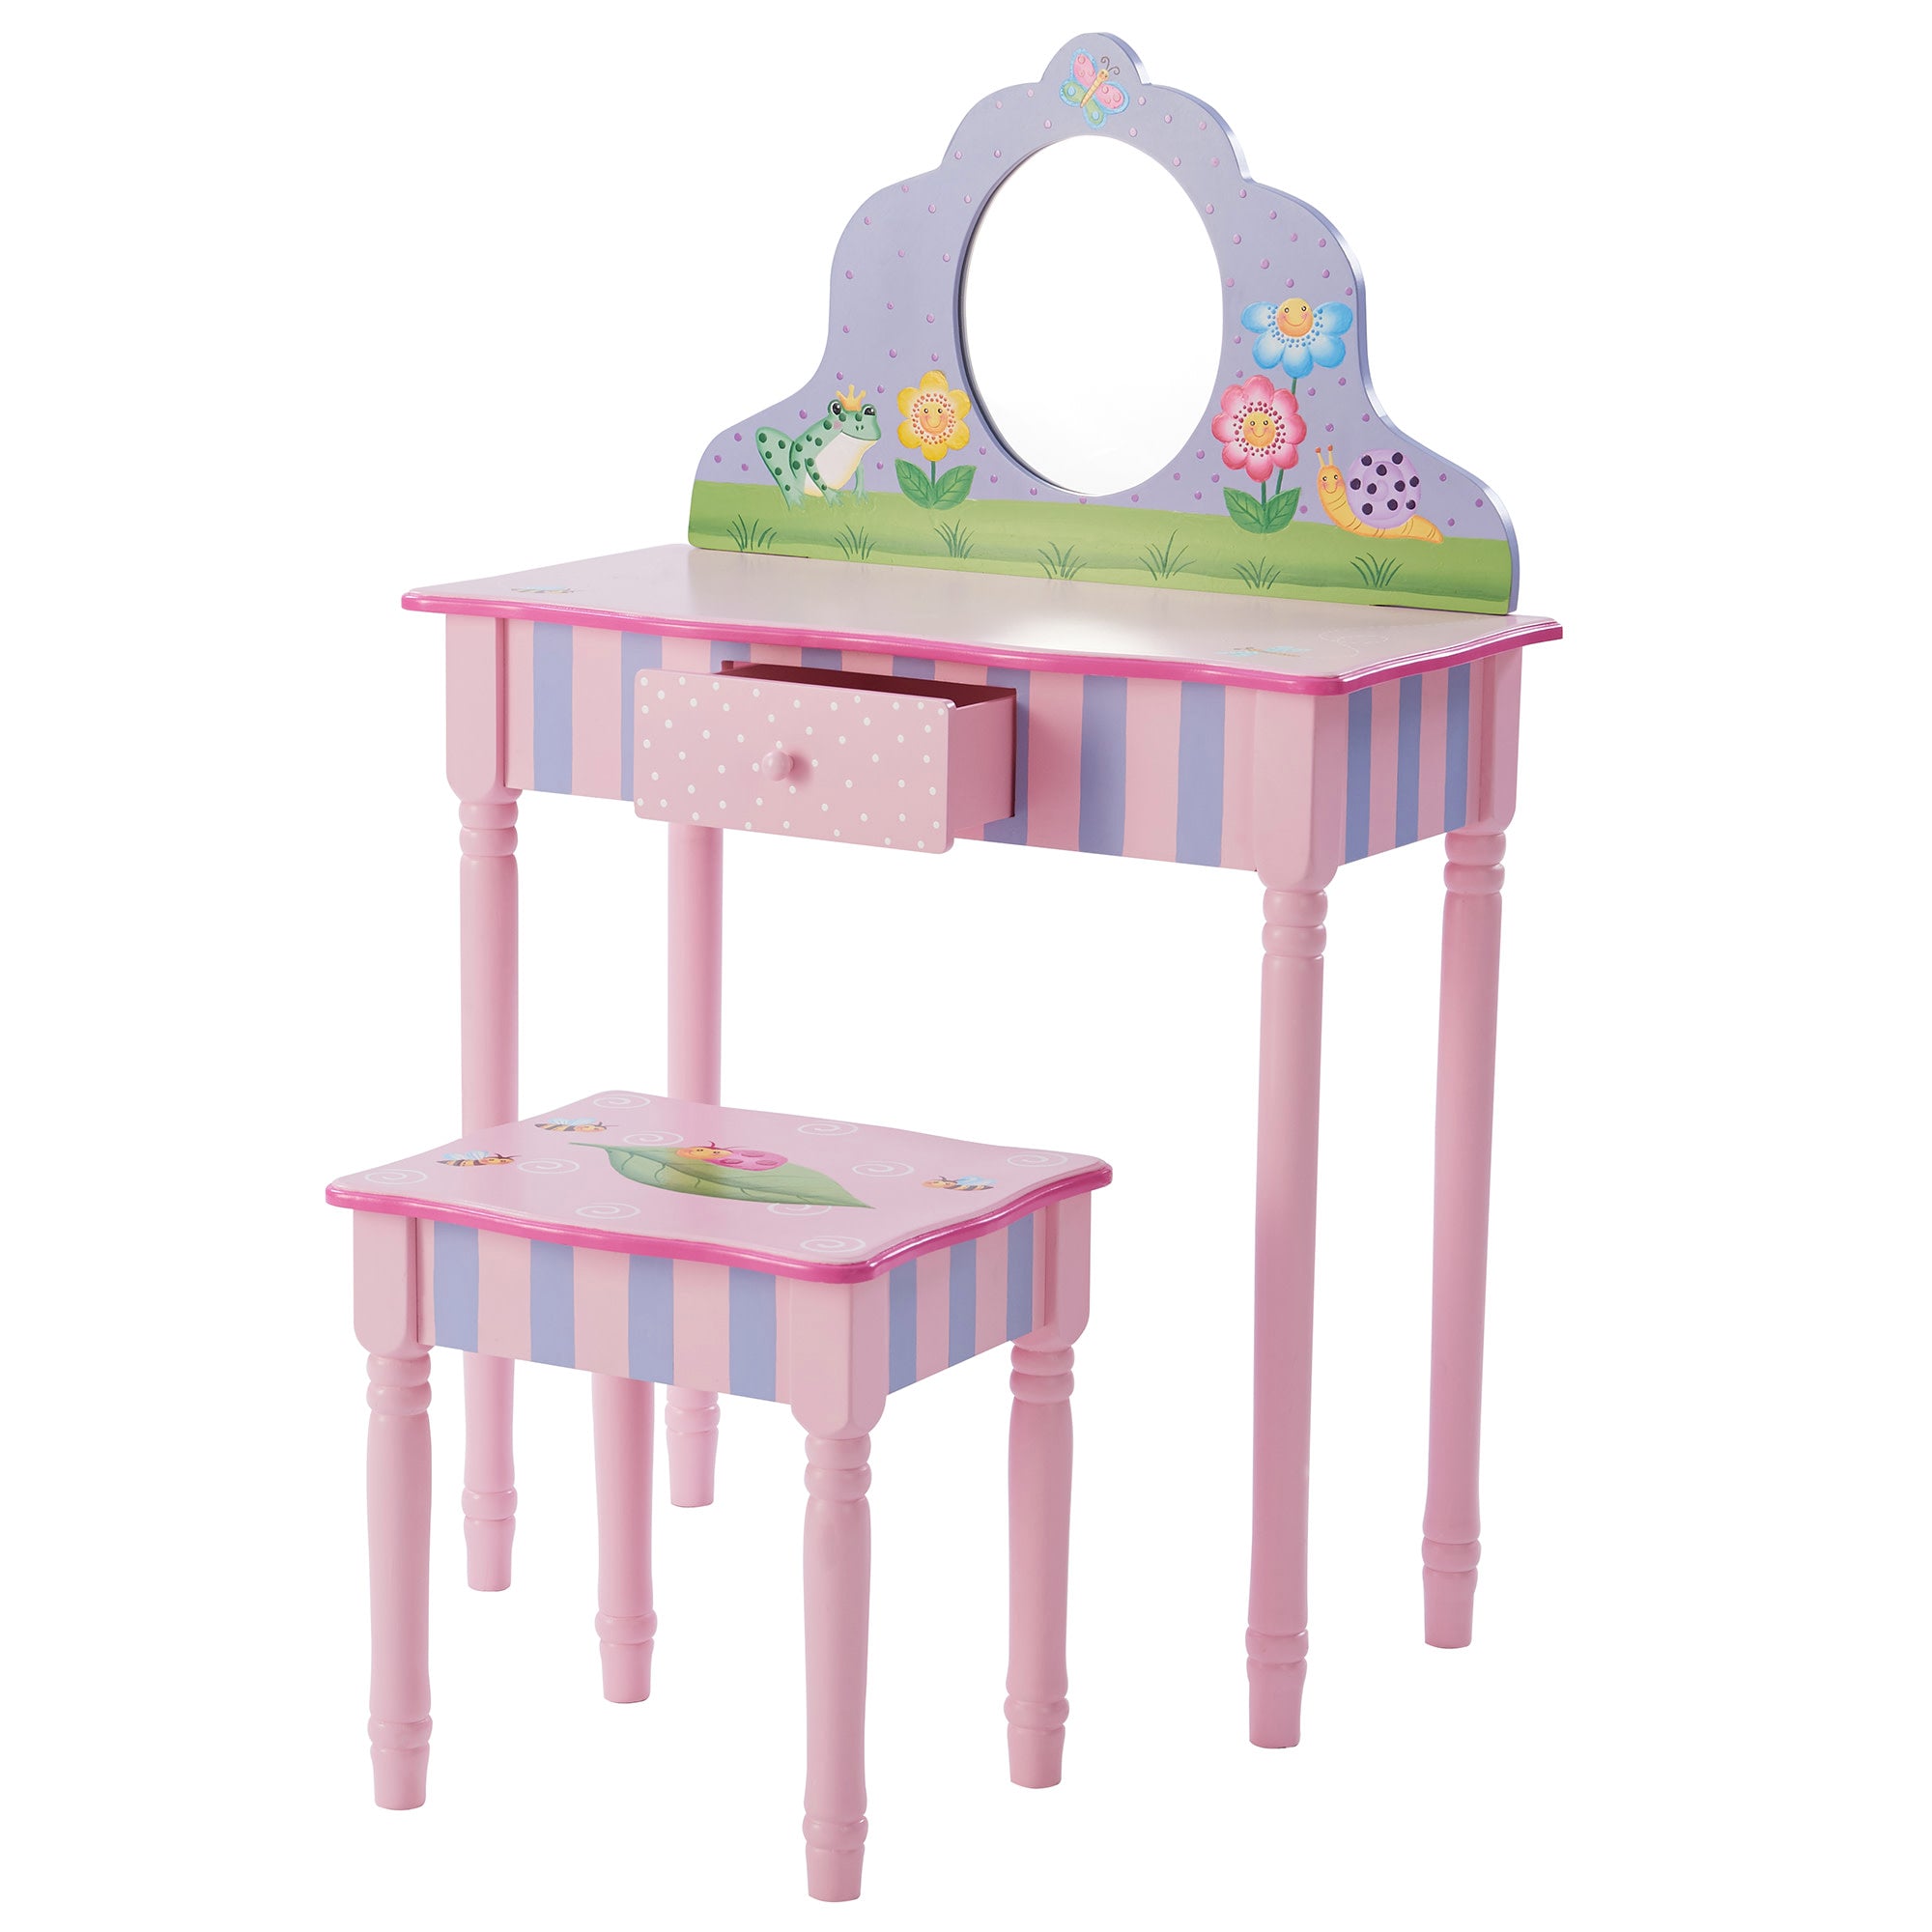 Fantasy Fields Kids Furniture Magic Garden Play Vanity Table and Stool Set